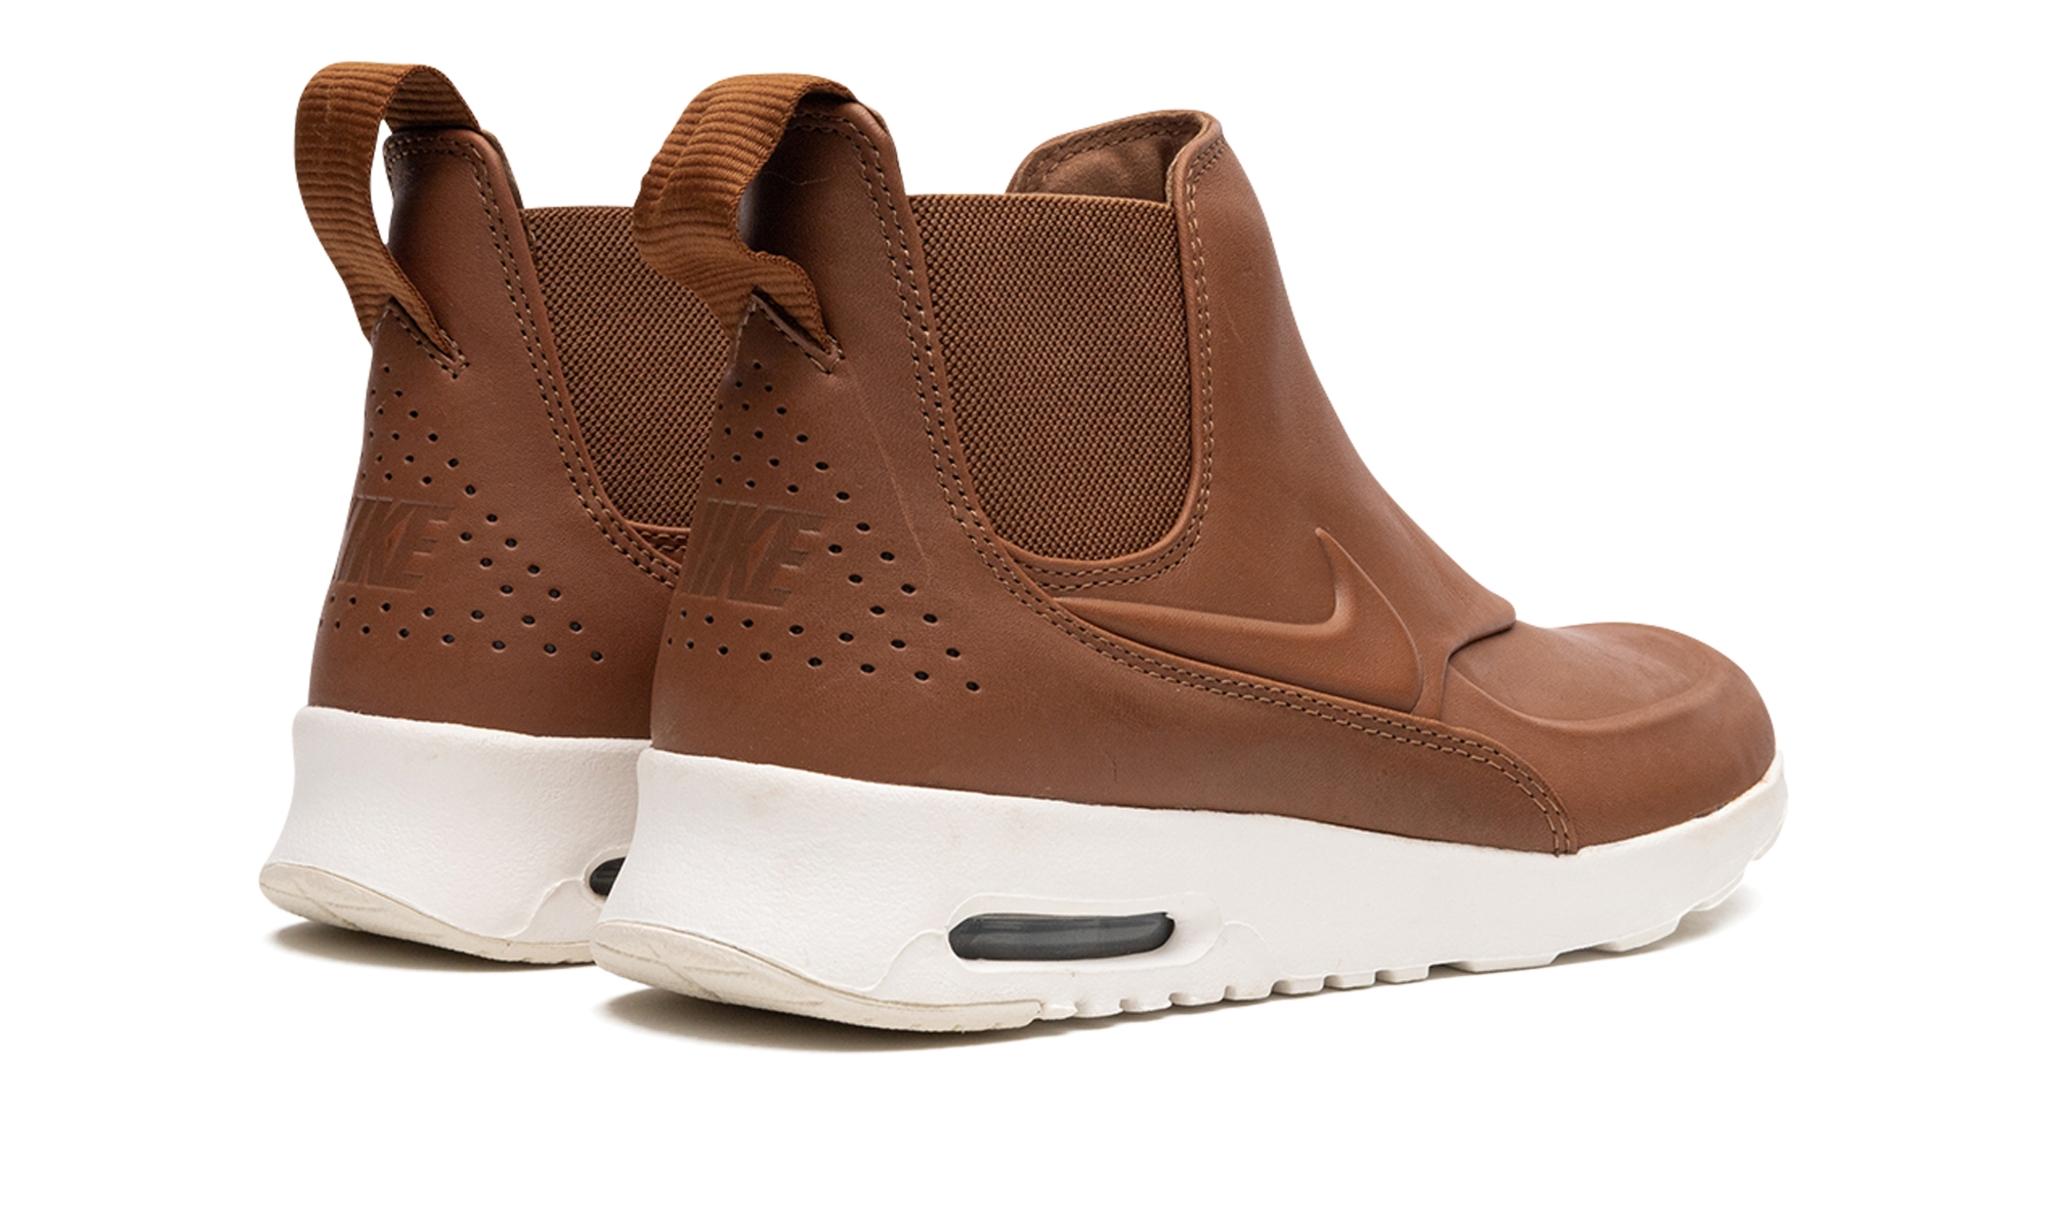 Nike Air Max Thea Mid "ale Brown" Shoes | Lyst UK